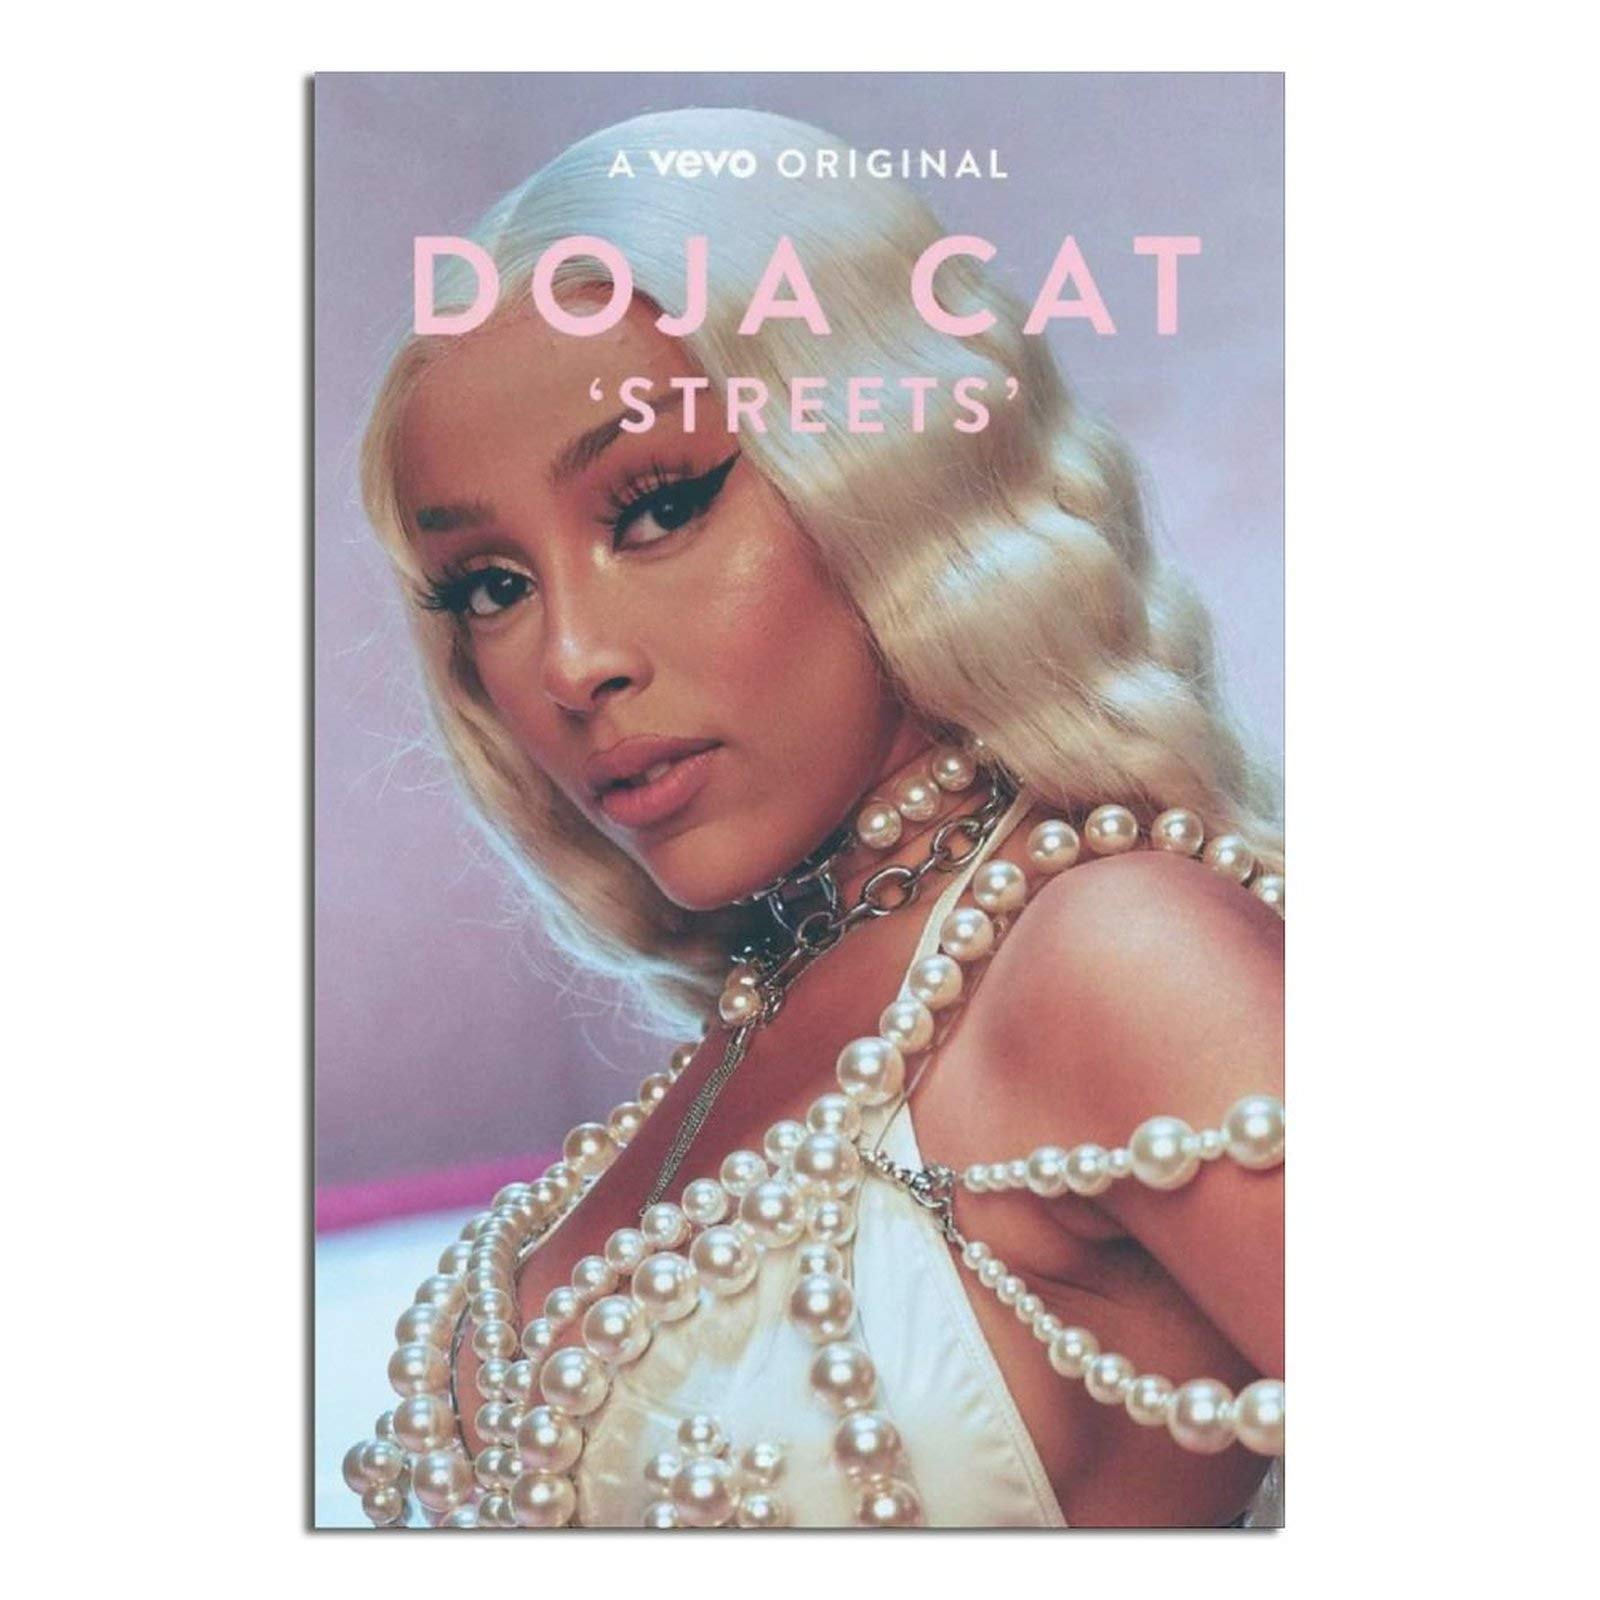 YTCH Sexy Singer Doja Cat Poster Canvas Art Poster Picture Modern Office Family Bedroom Decorative Posters Gift Wall Decor Painting Posters 8×12inc...